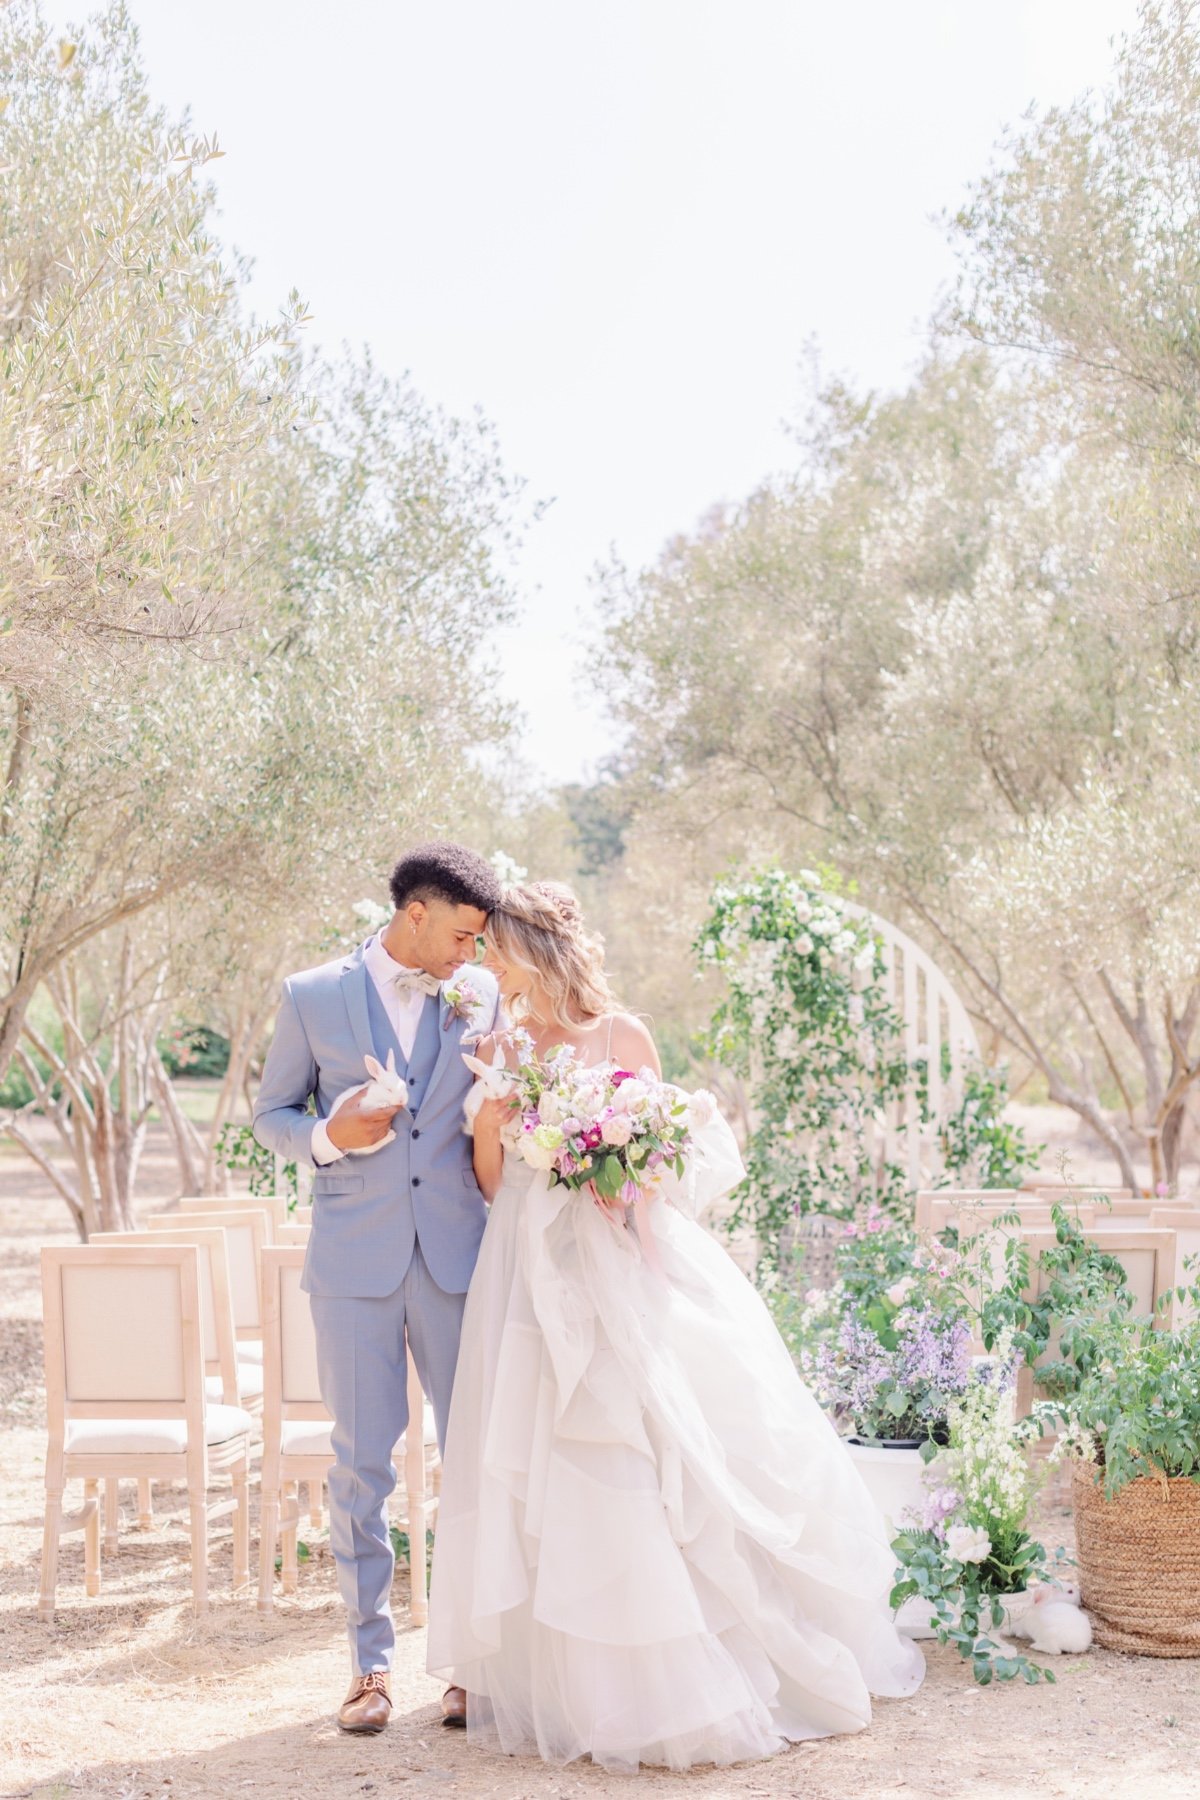 Make No Mistake, Spring Has Sprung And This Wedding Is Proof